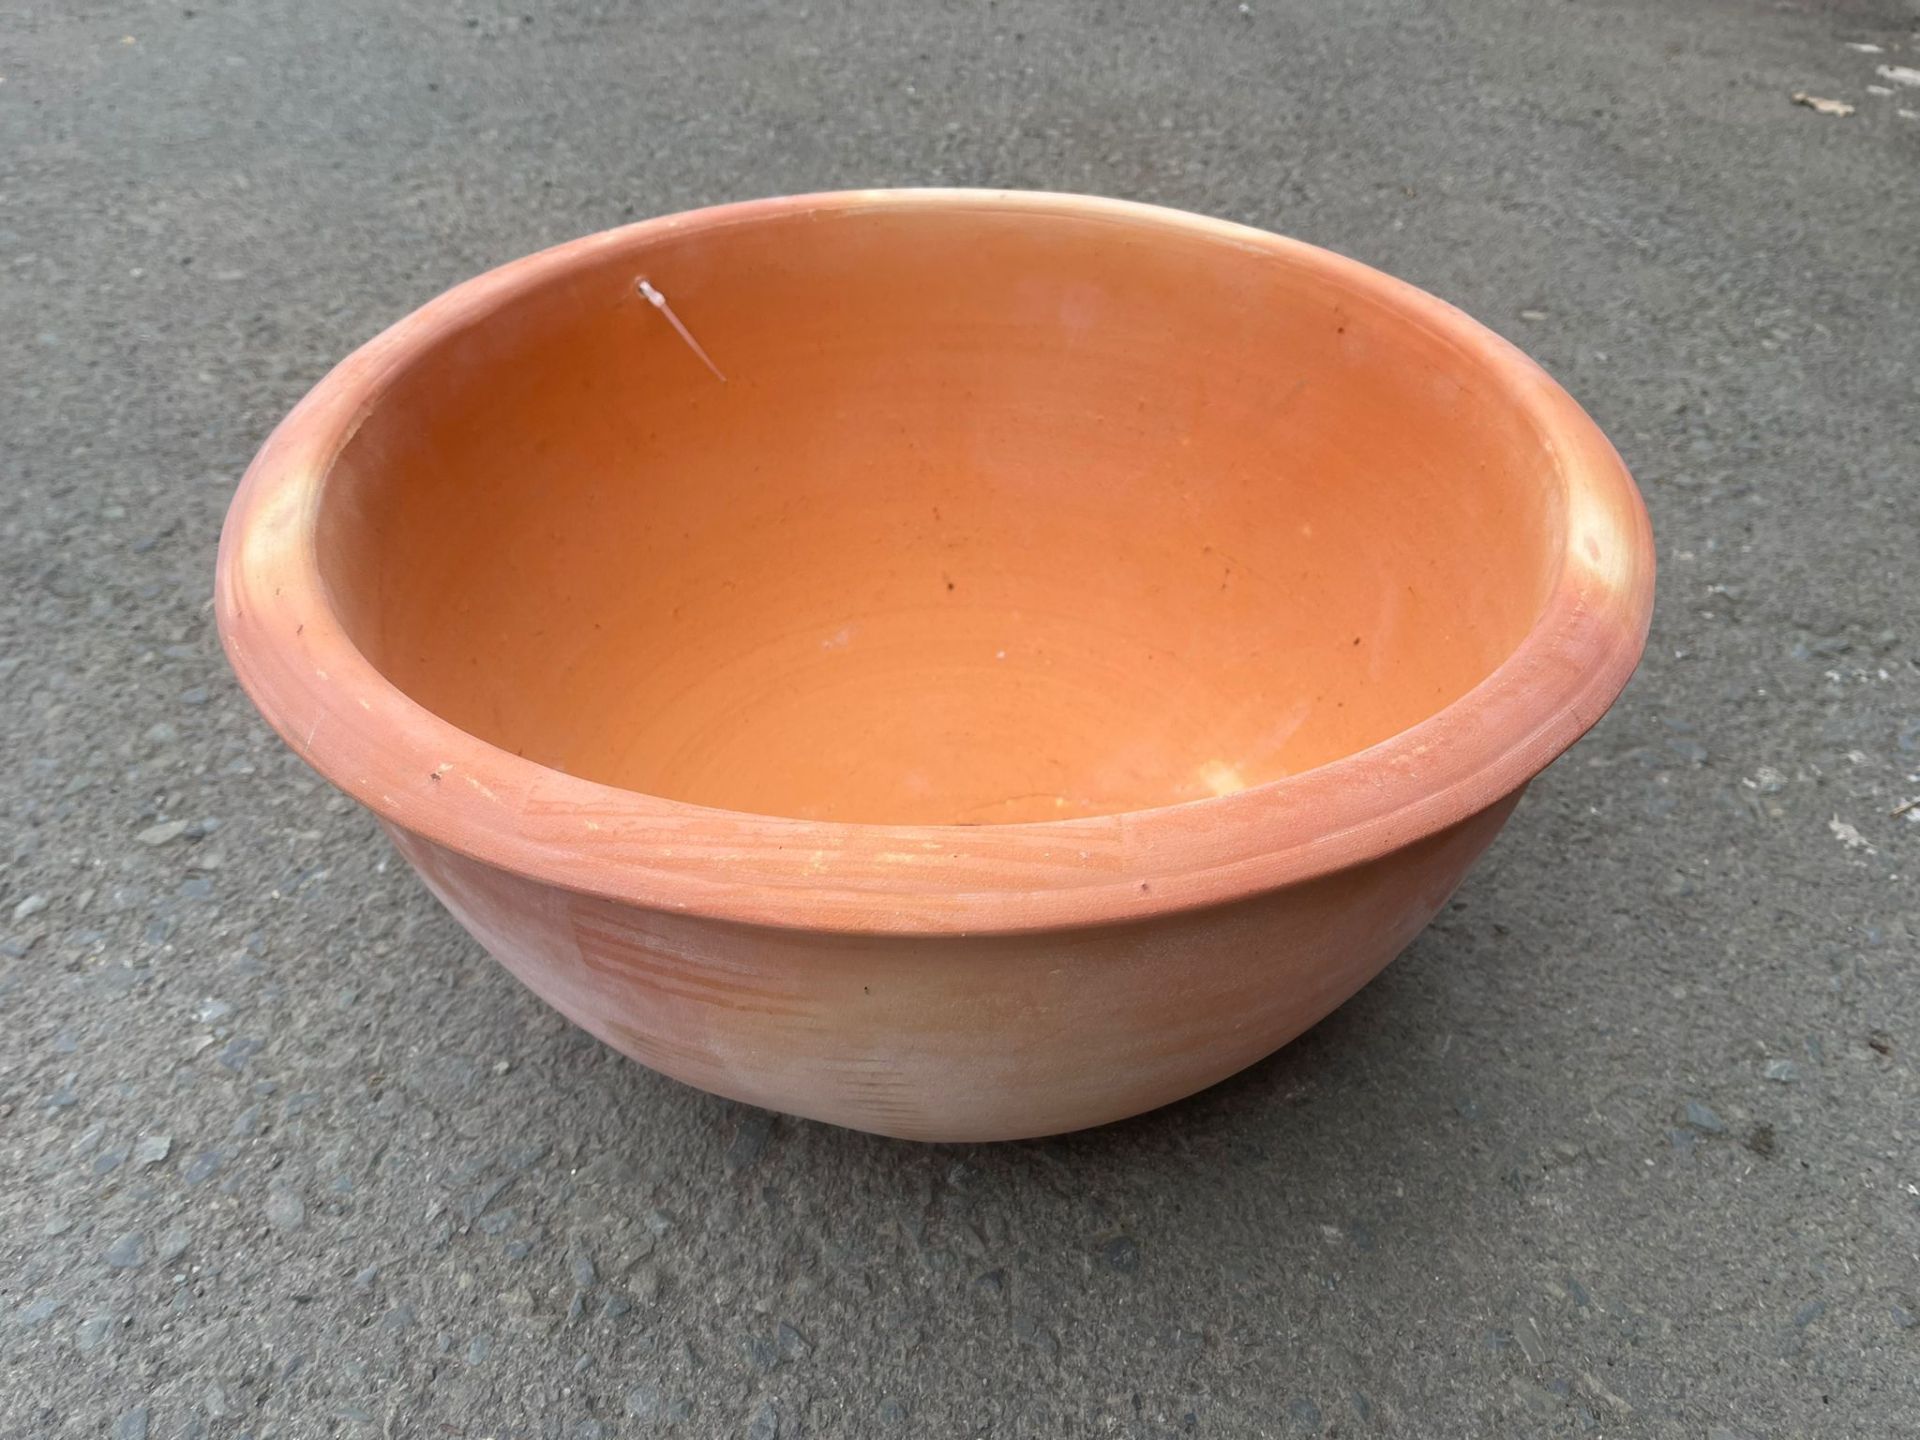 RRP Â£59.99 - NEW LARGE TERRACOTTA PLANTER, FROST PROOF. COLLECTION ONLY